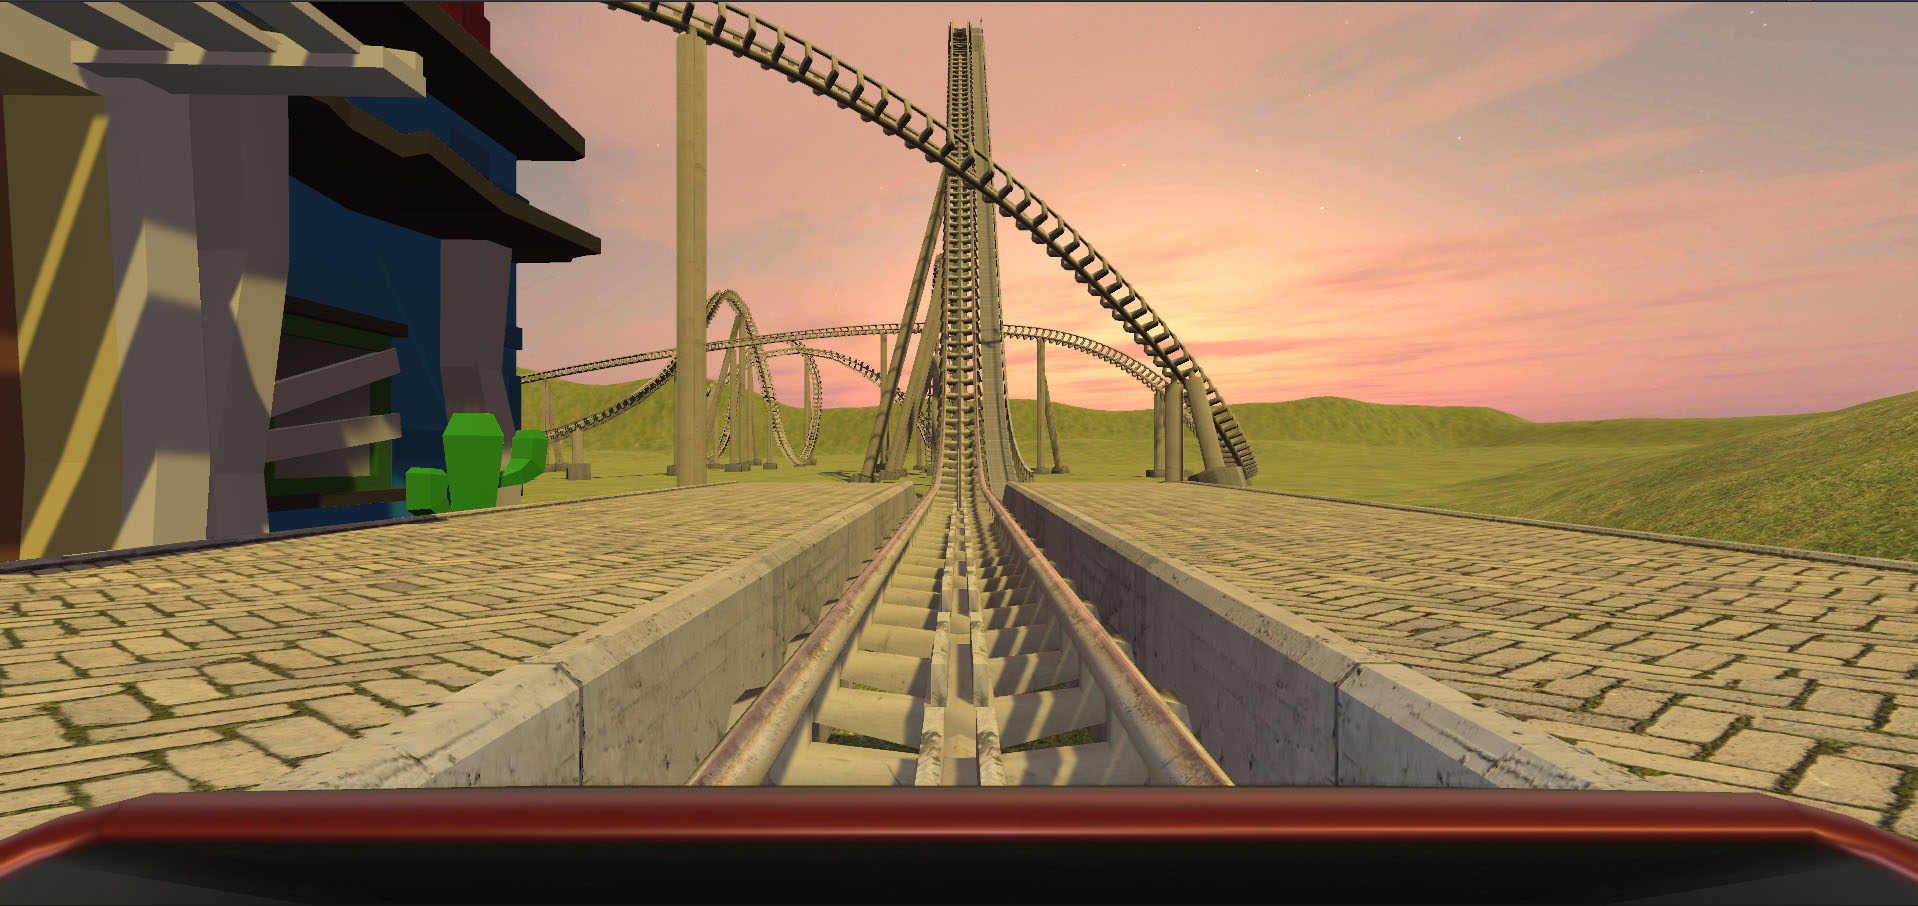 roller coaster simulation in virtual reality